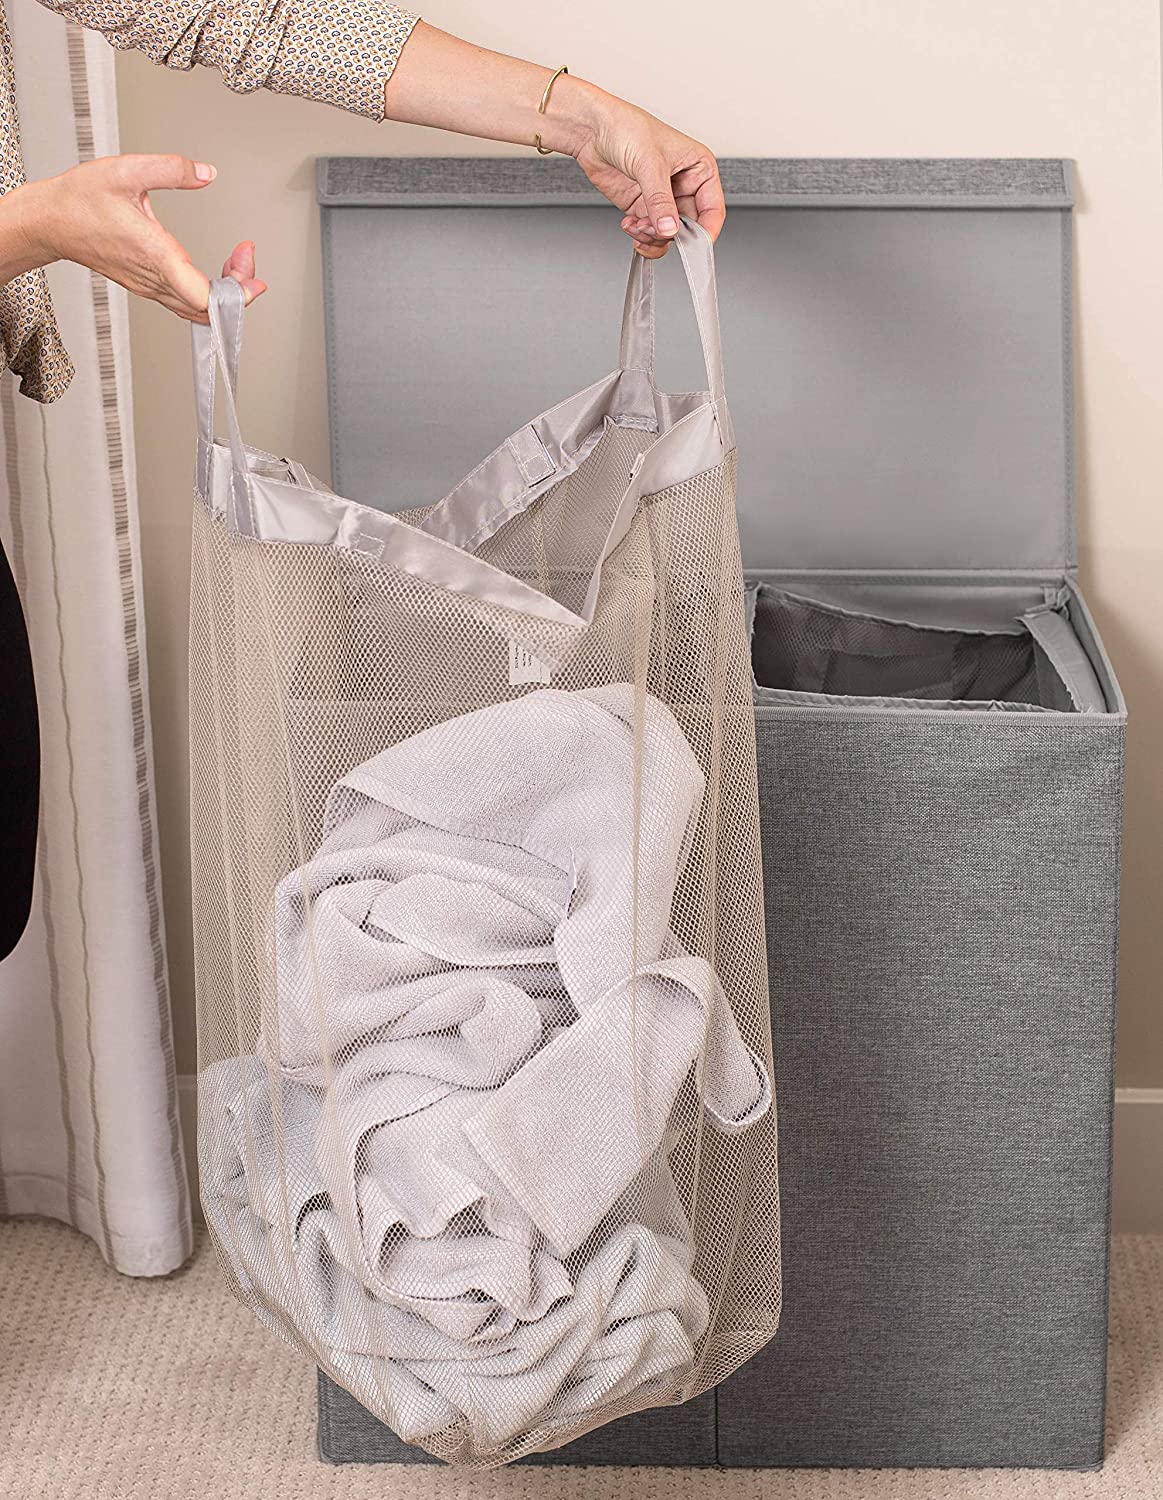 BirdRock Home Double Linen Laundry Hamper with Lid and Removable Liners - Grey - image 3 of 10